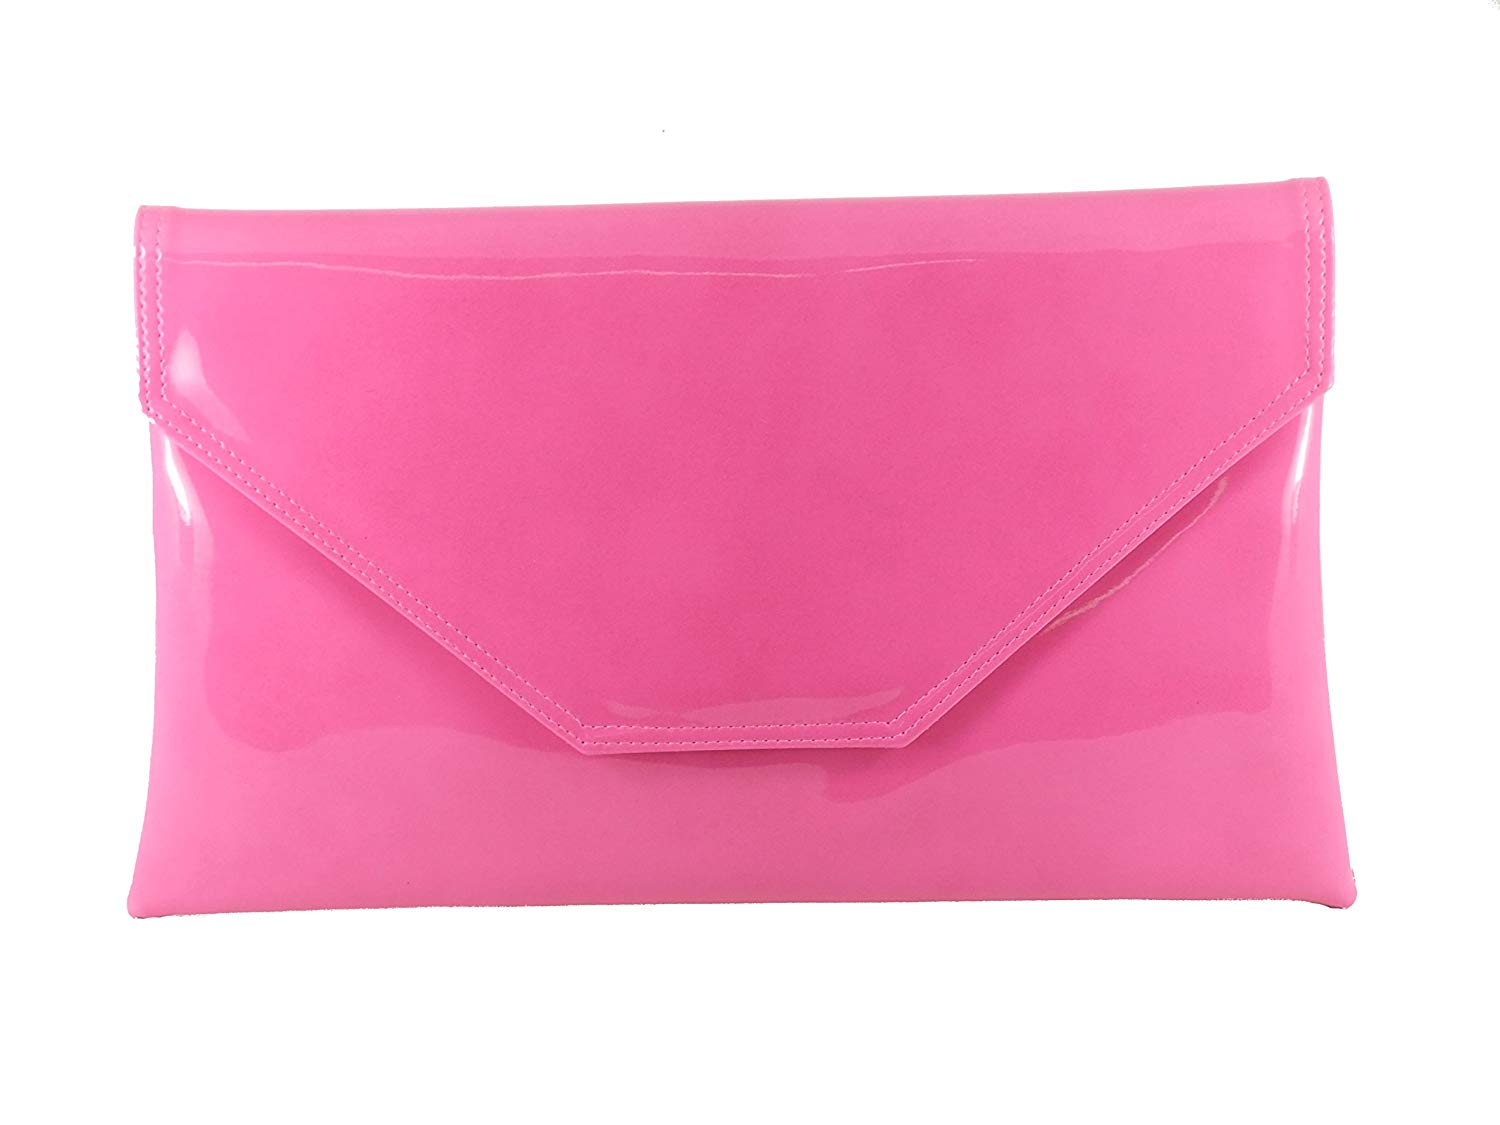 LONI Stylish Clutch/ Shoulder Bag in Patent Faux Leather Large Envelope ...